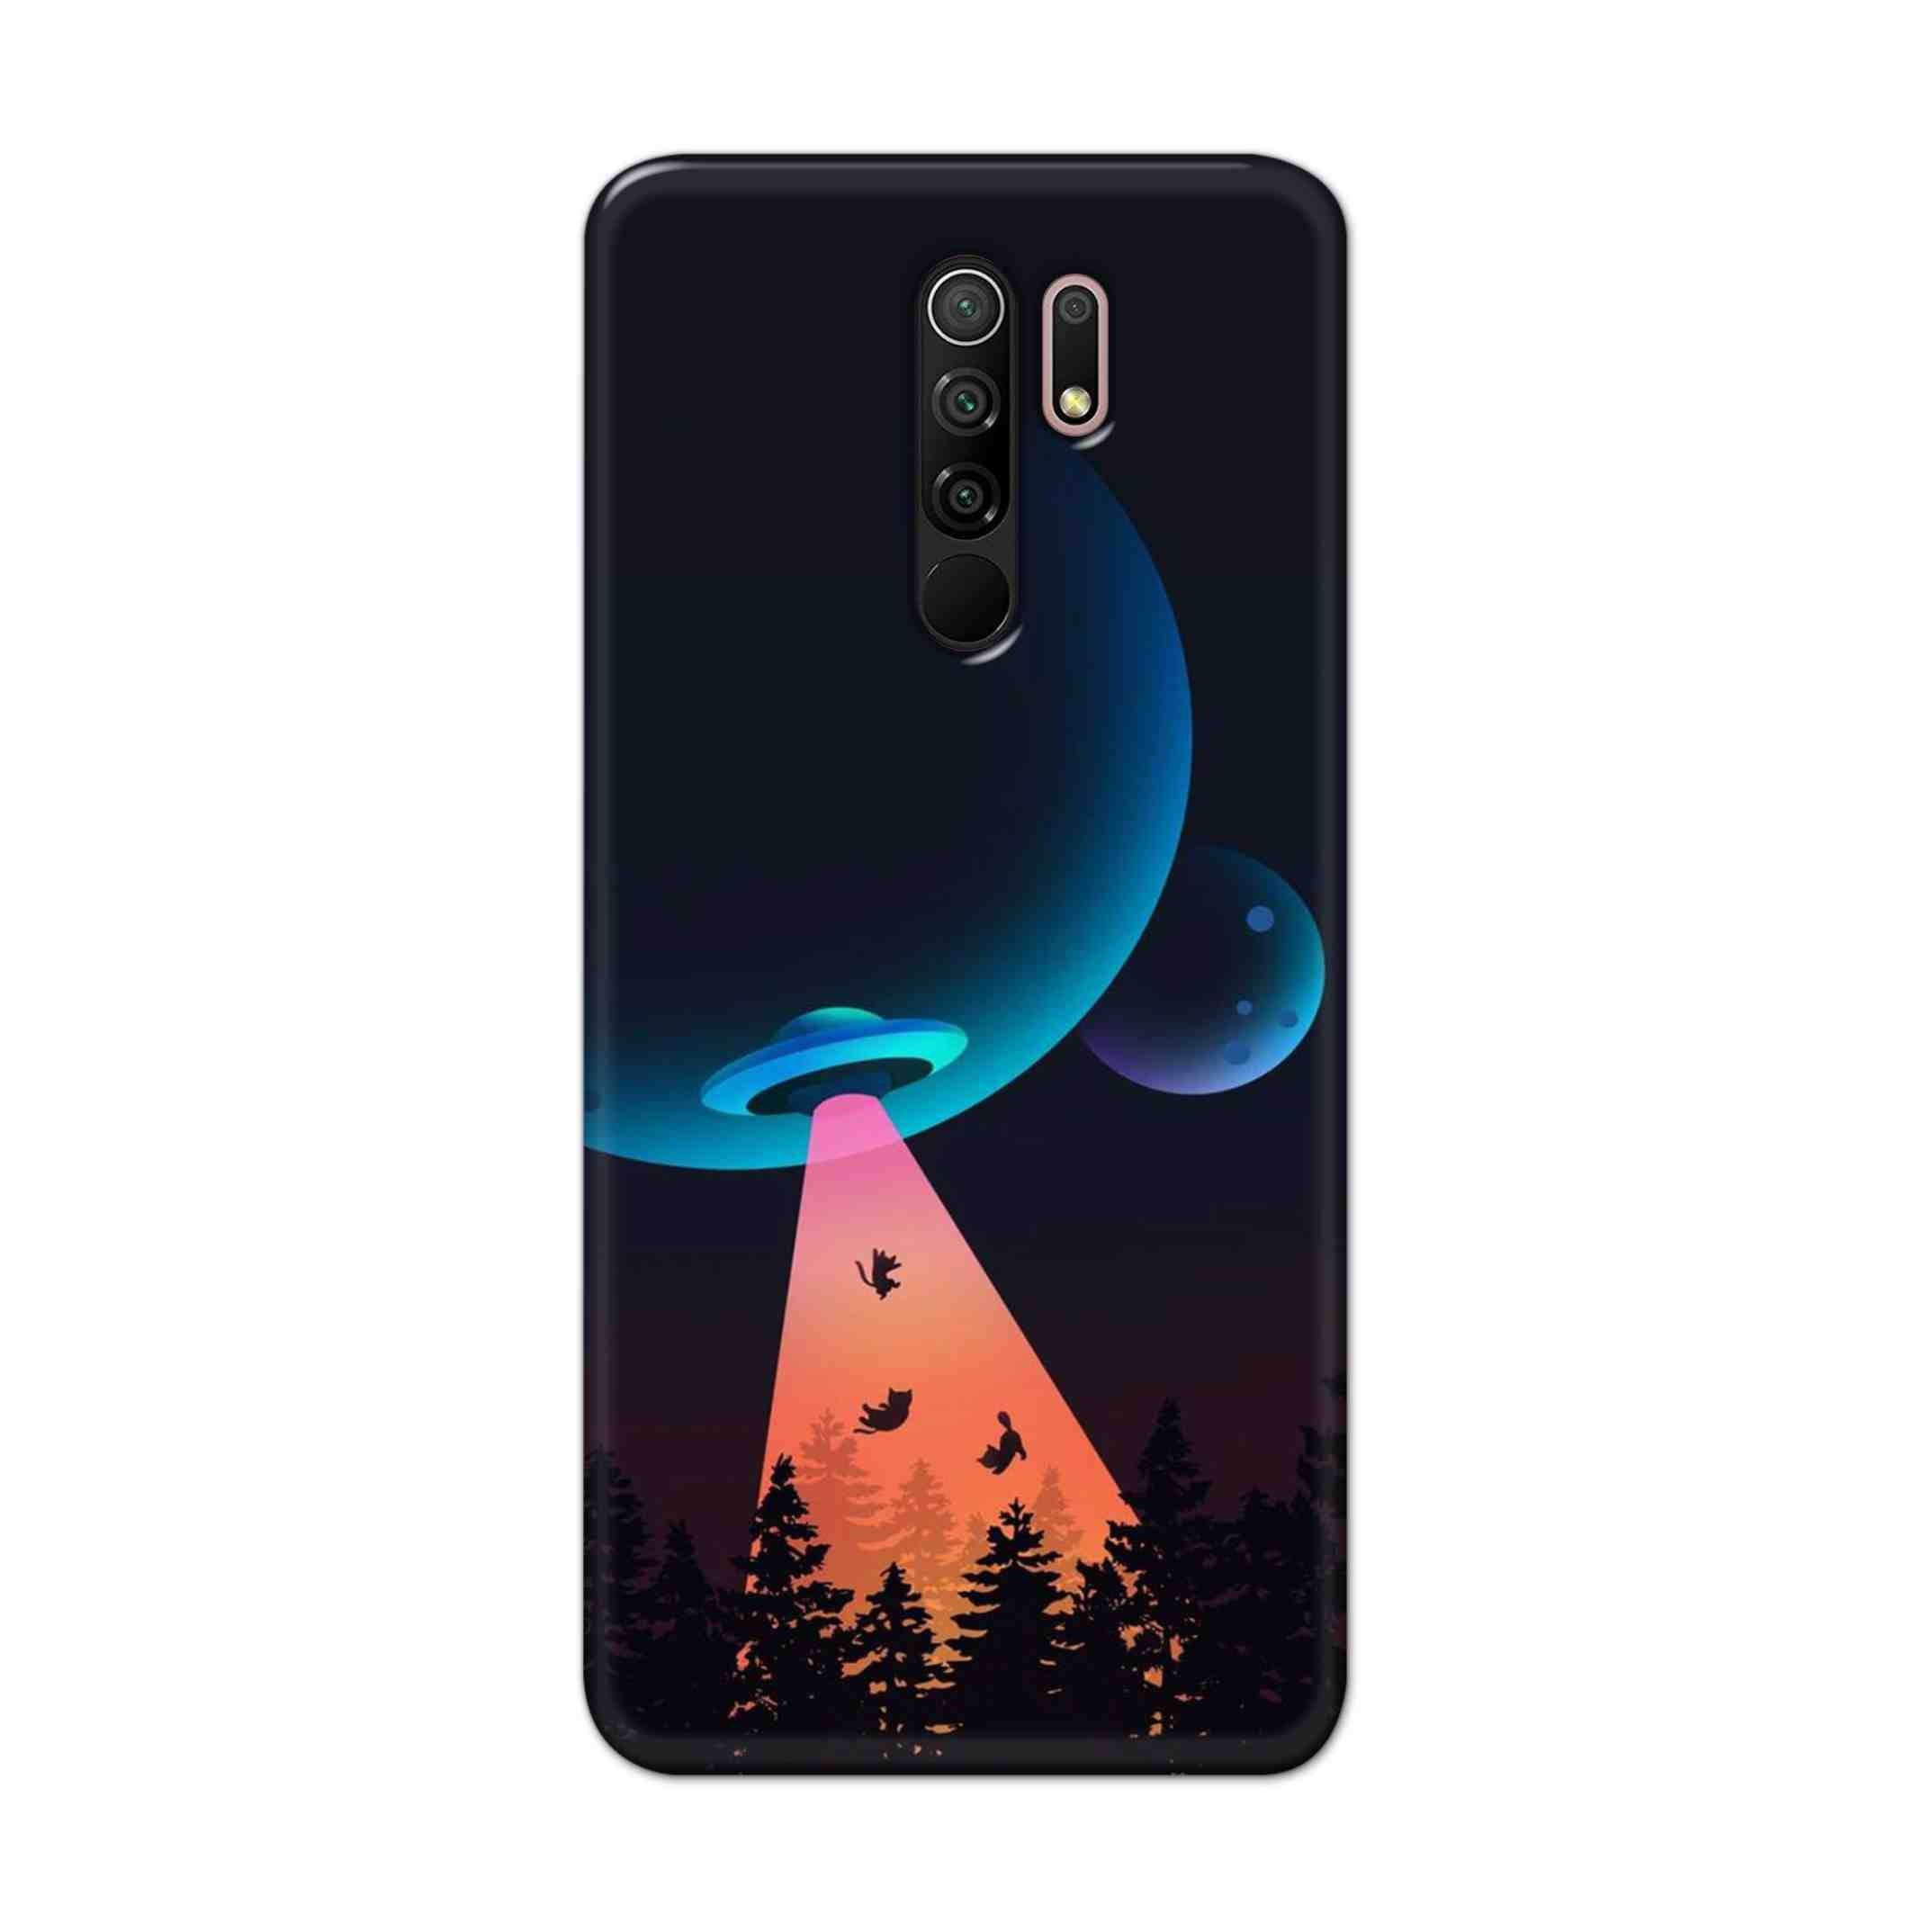 Buy Spaceship Hard Back Mobile Phone Case Cover For Xiaomi Redmi 9 Prime Online